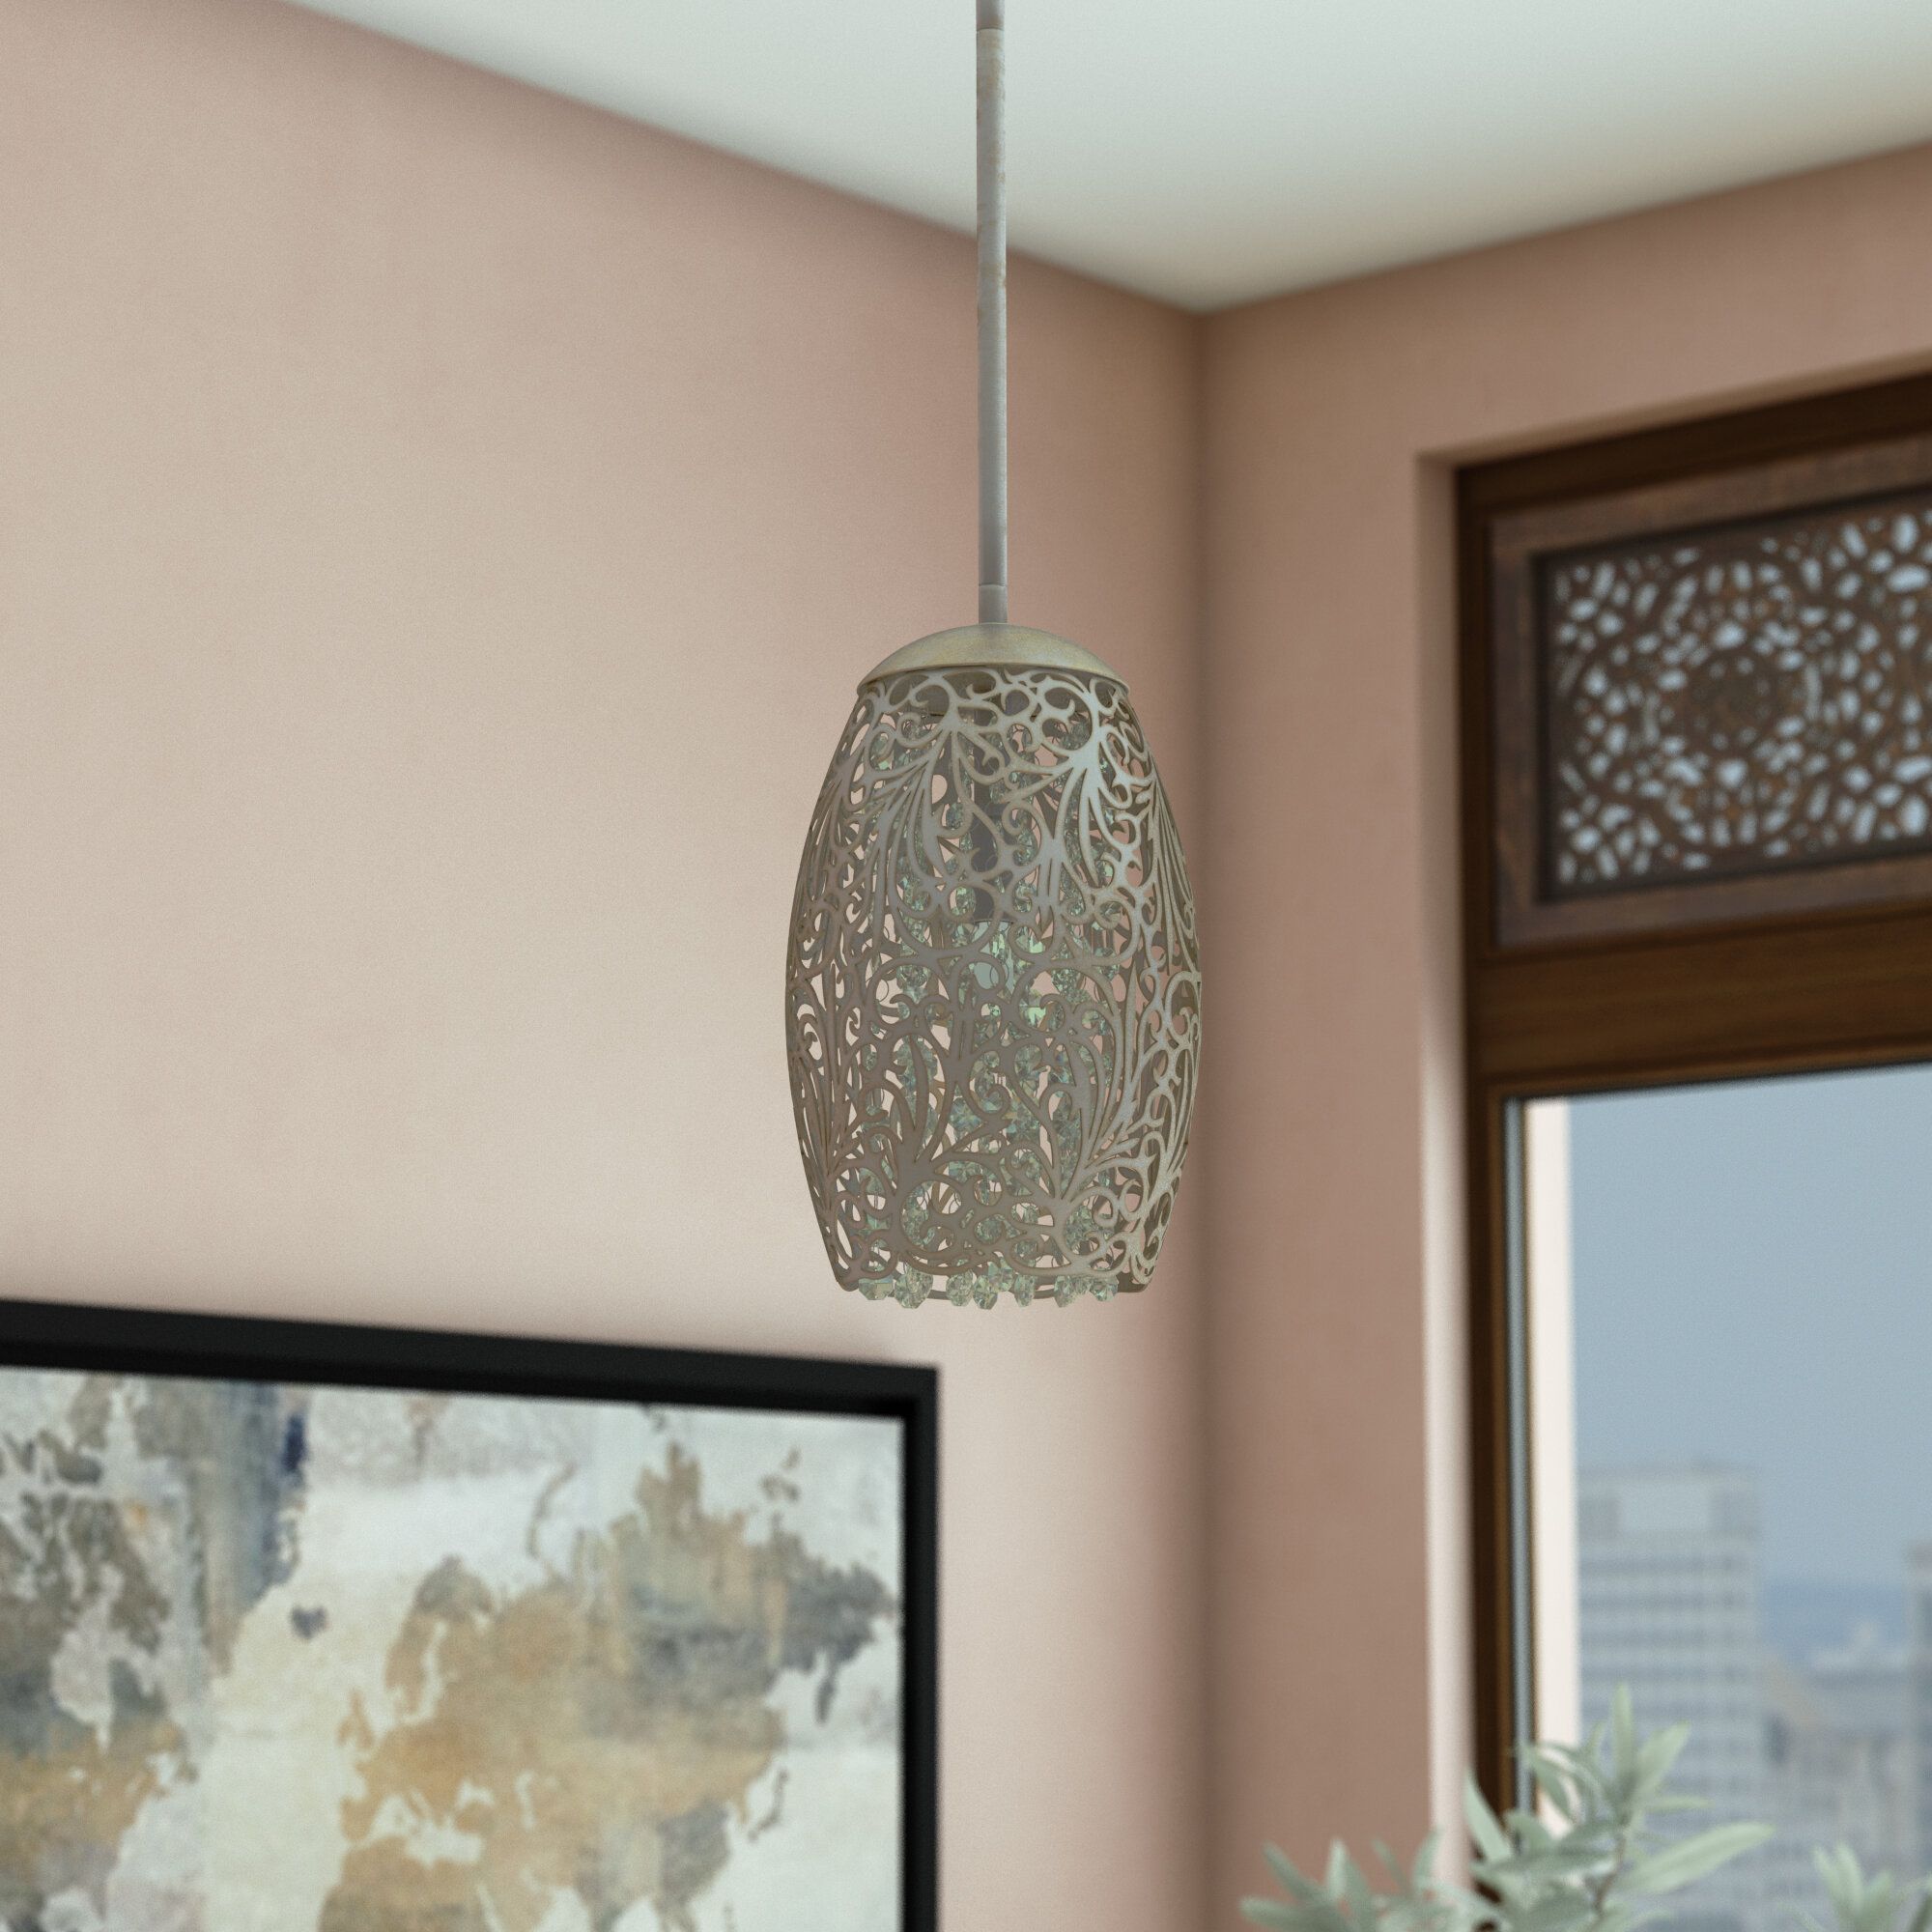 Crystal Mini (less Than 10" Wide) Pendant Lighting You'll Intended For Devereaux 1 Light Single Globe Pendants (View 29 of 30)